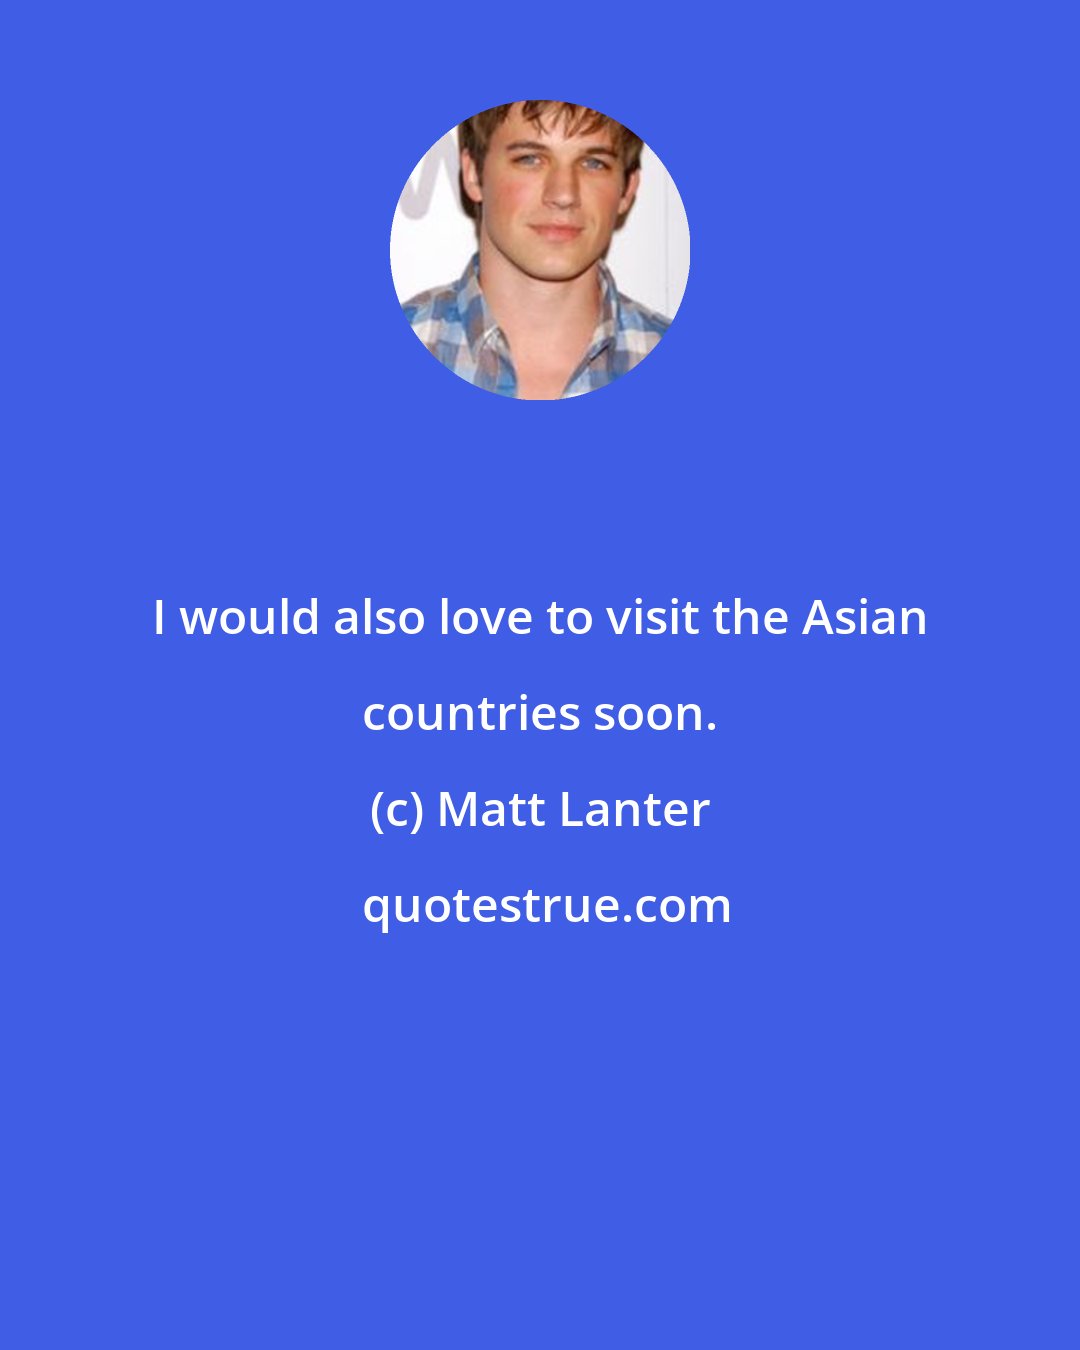 Matt Lanter: I would also love to visit the Asian countries soon.